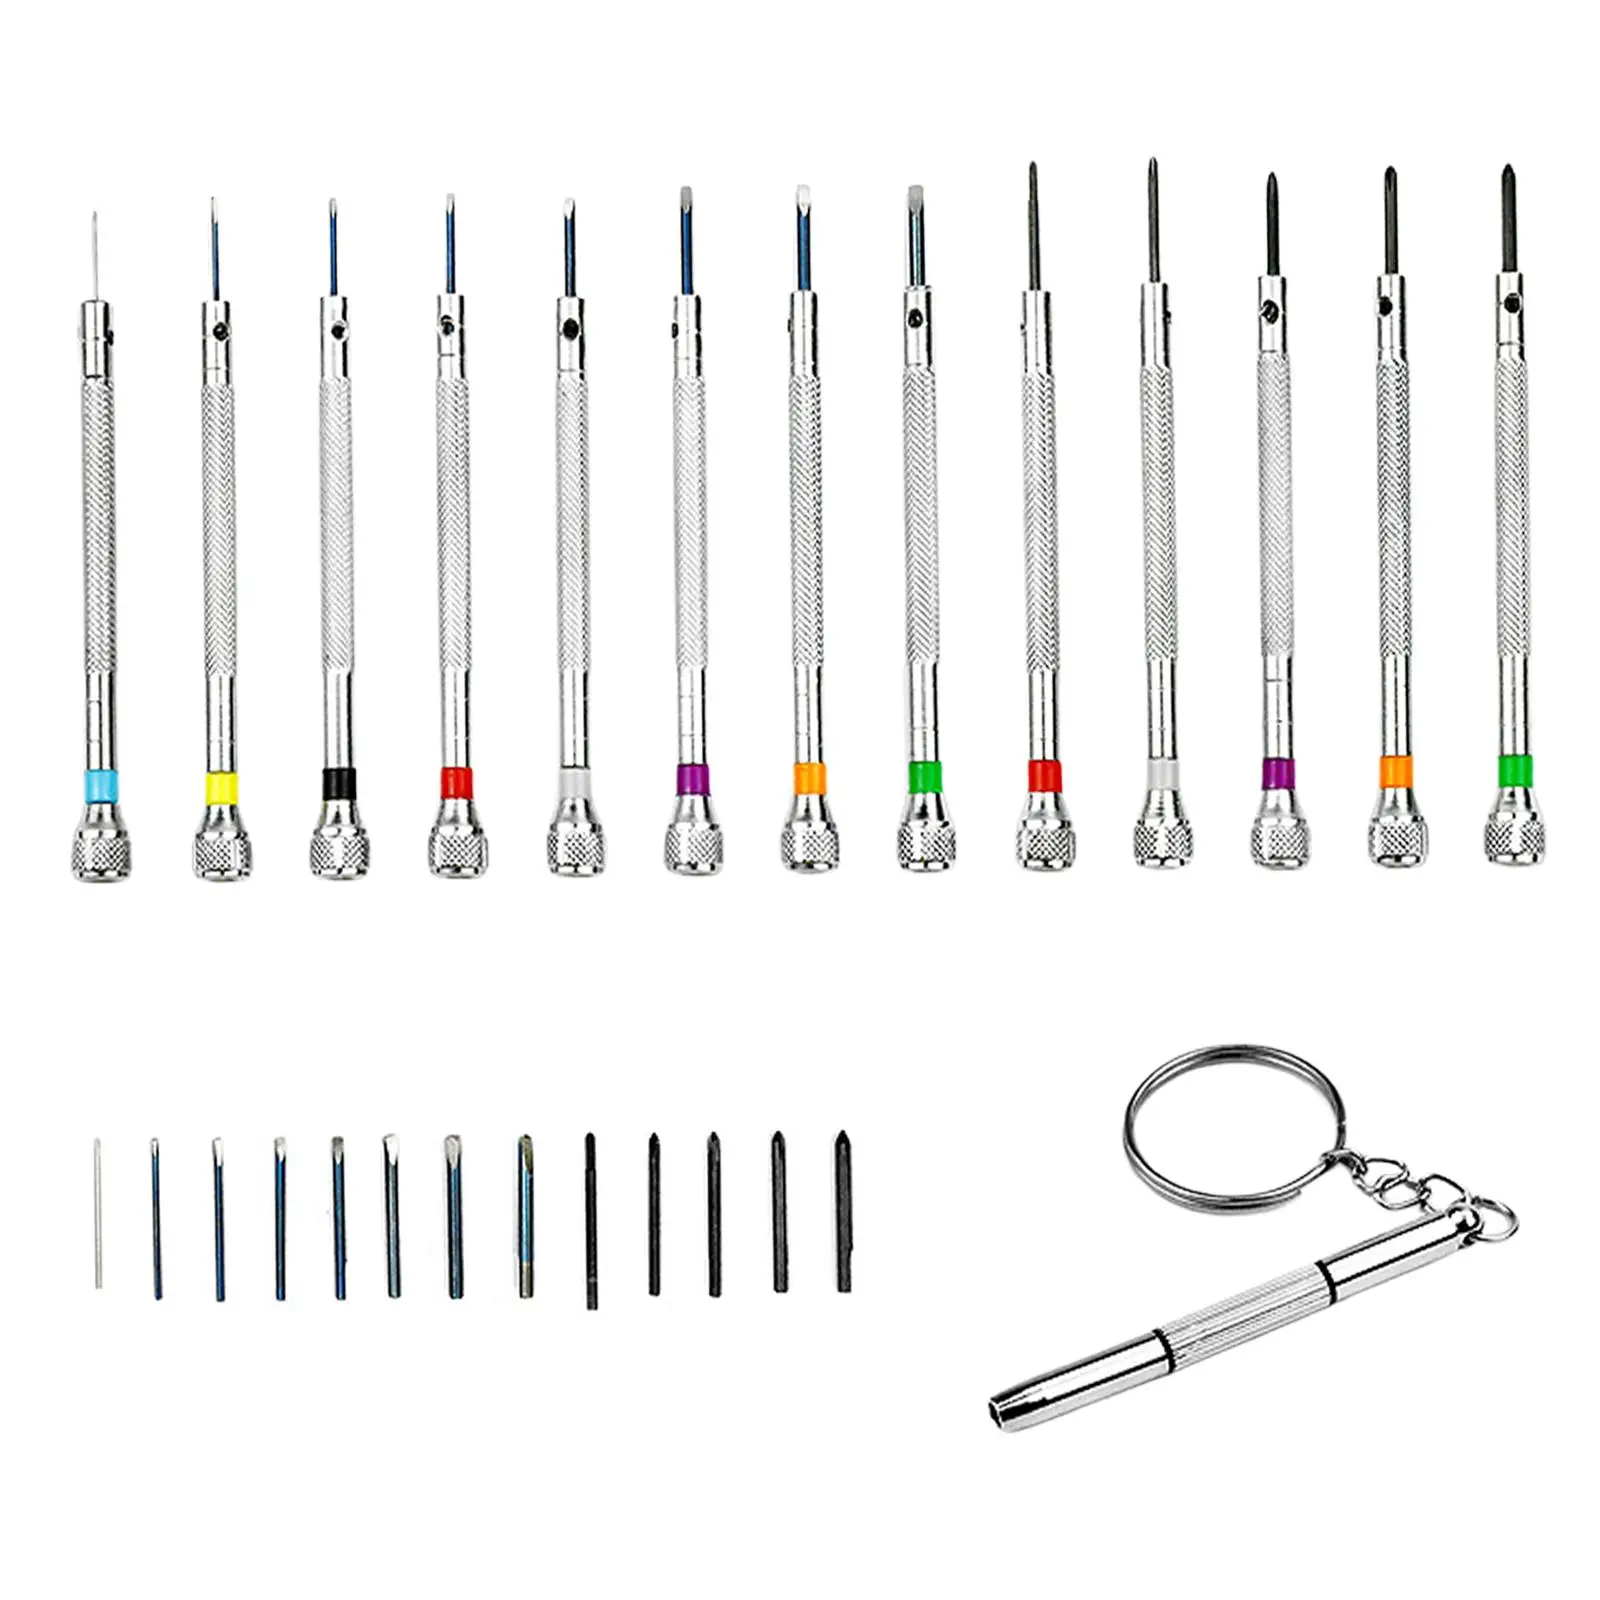 13 Pieces Watch Repair Screwdriver Set Screws Lightweight Small Portable Household for Watch Phone Glasses Camera Computer